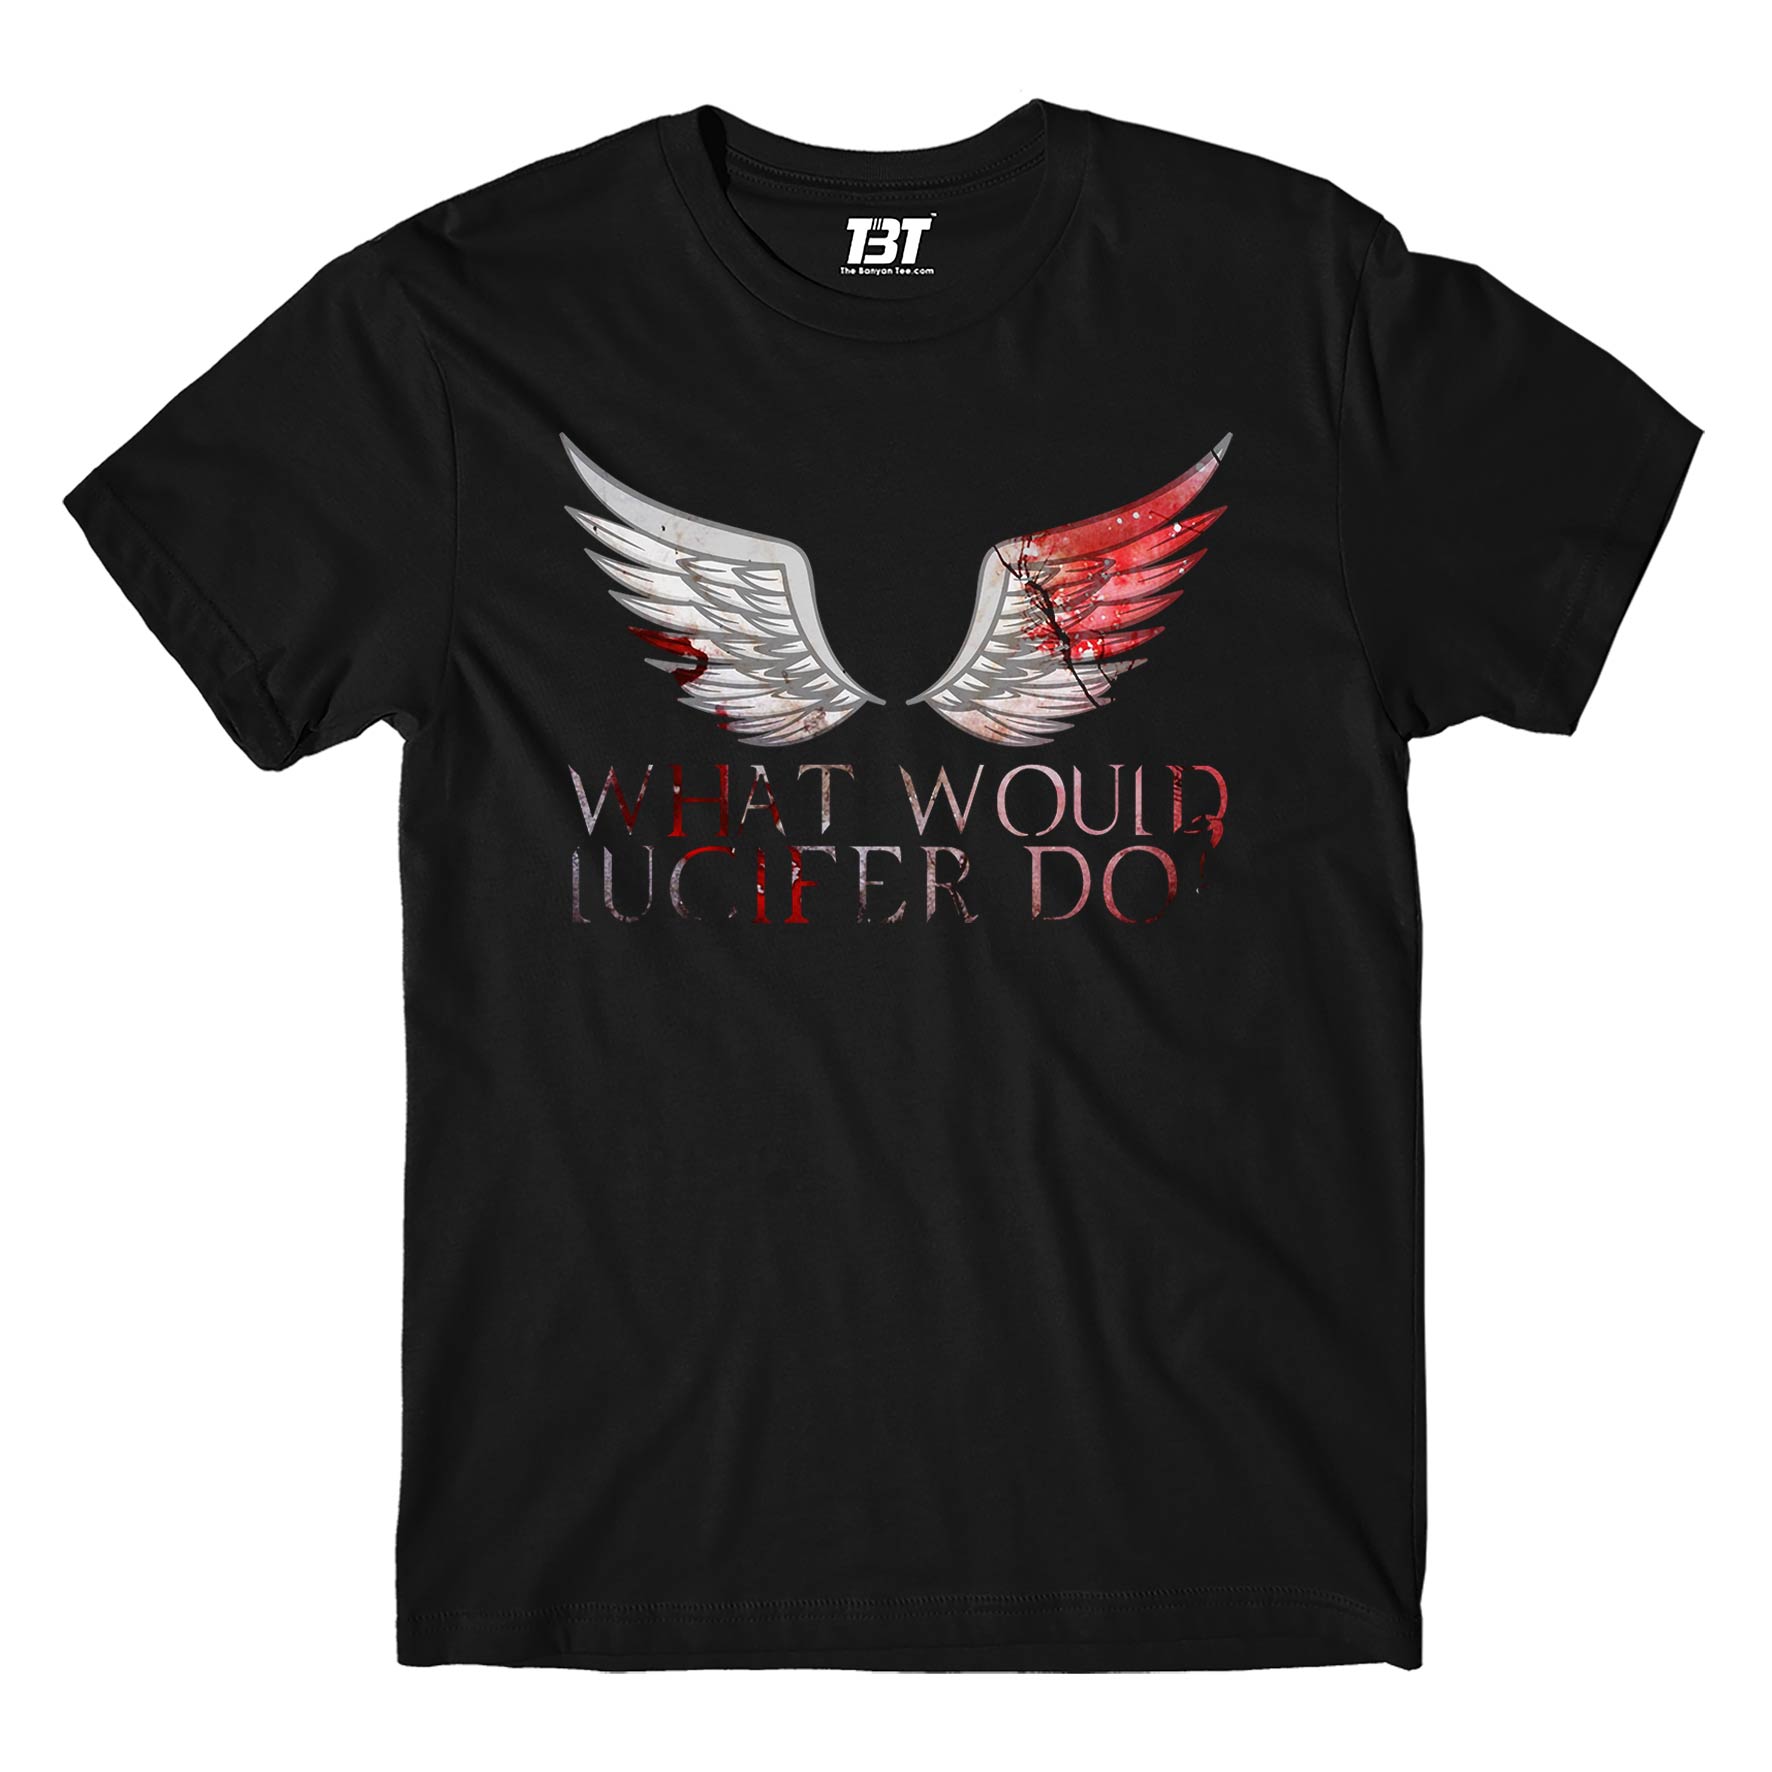 the banyan tee merch on sale Lucifer T shirt - On Sale - L (Chest size 42 IN)